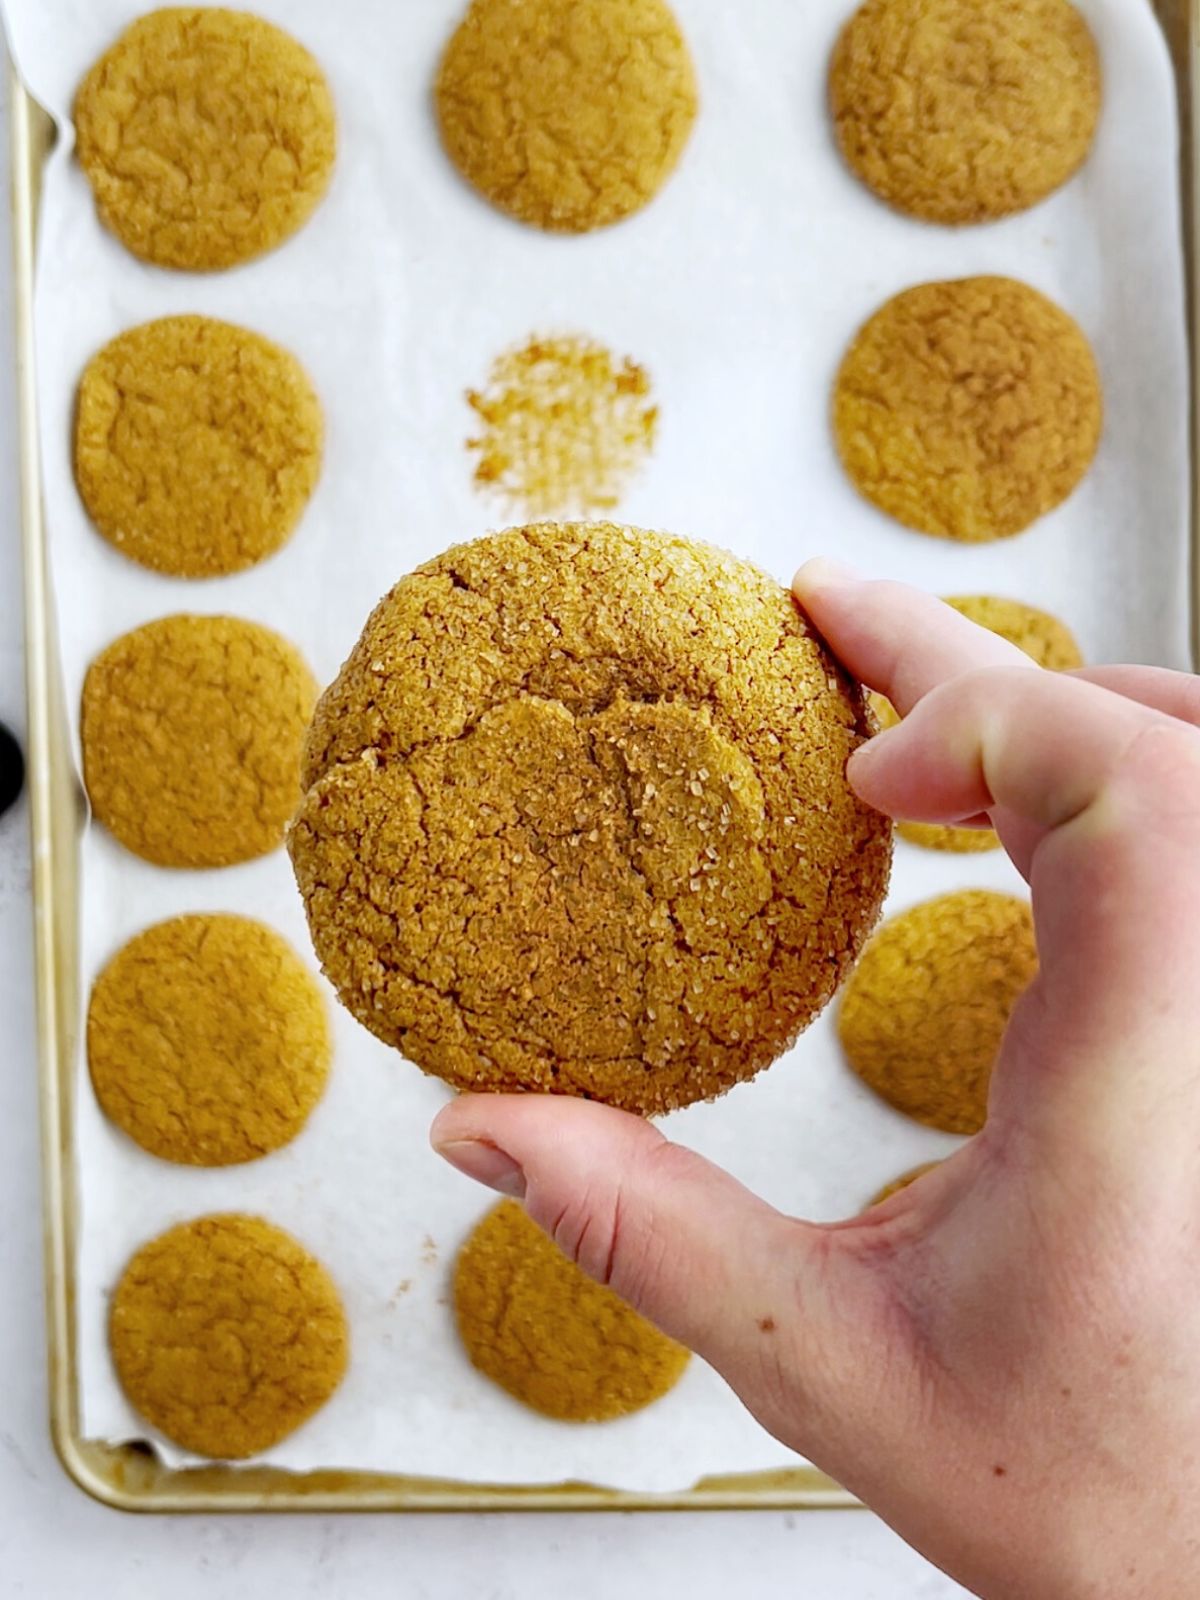 hand holding a baked molasses spice cookie with the sheet pan of baked cookies below.